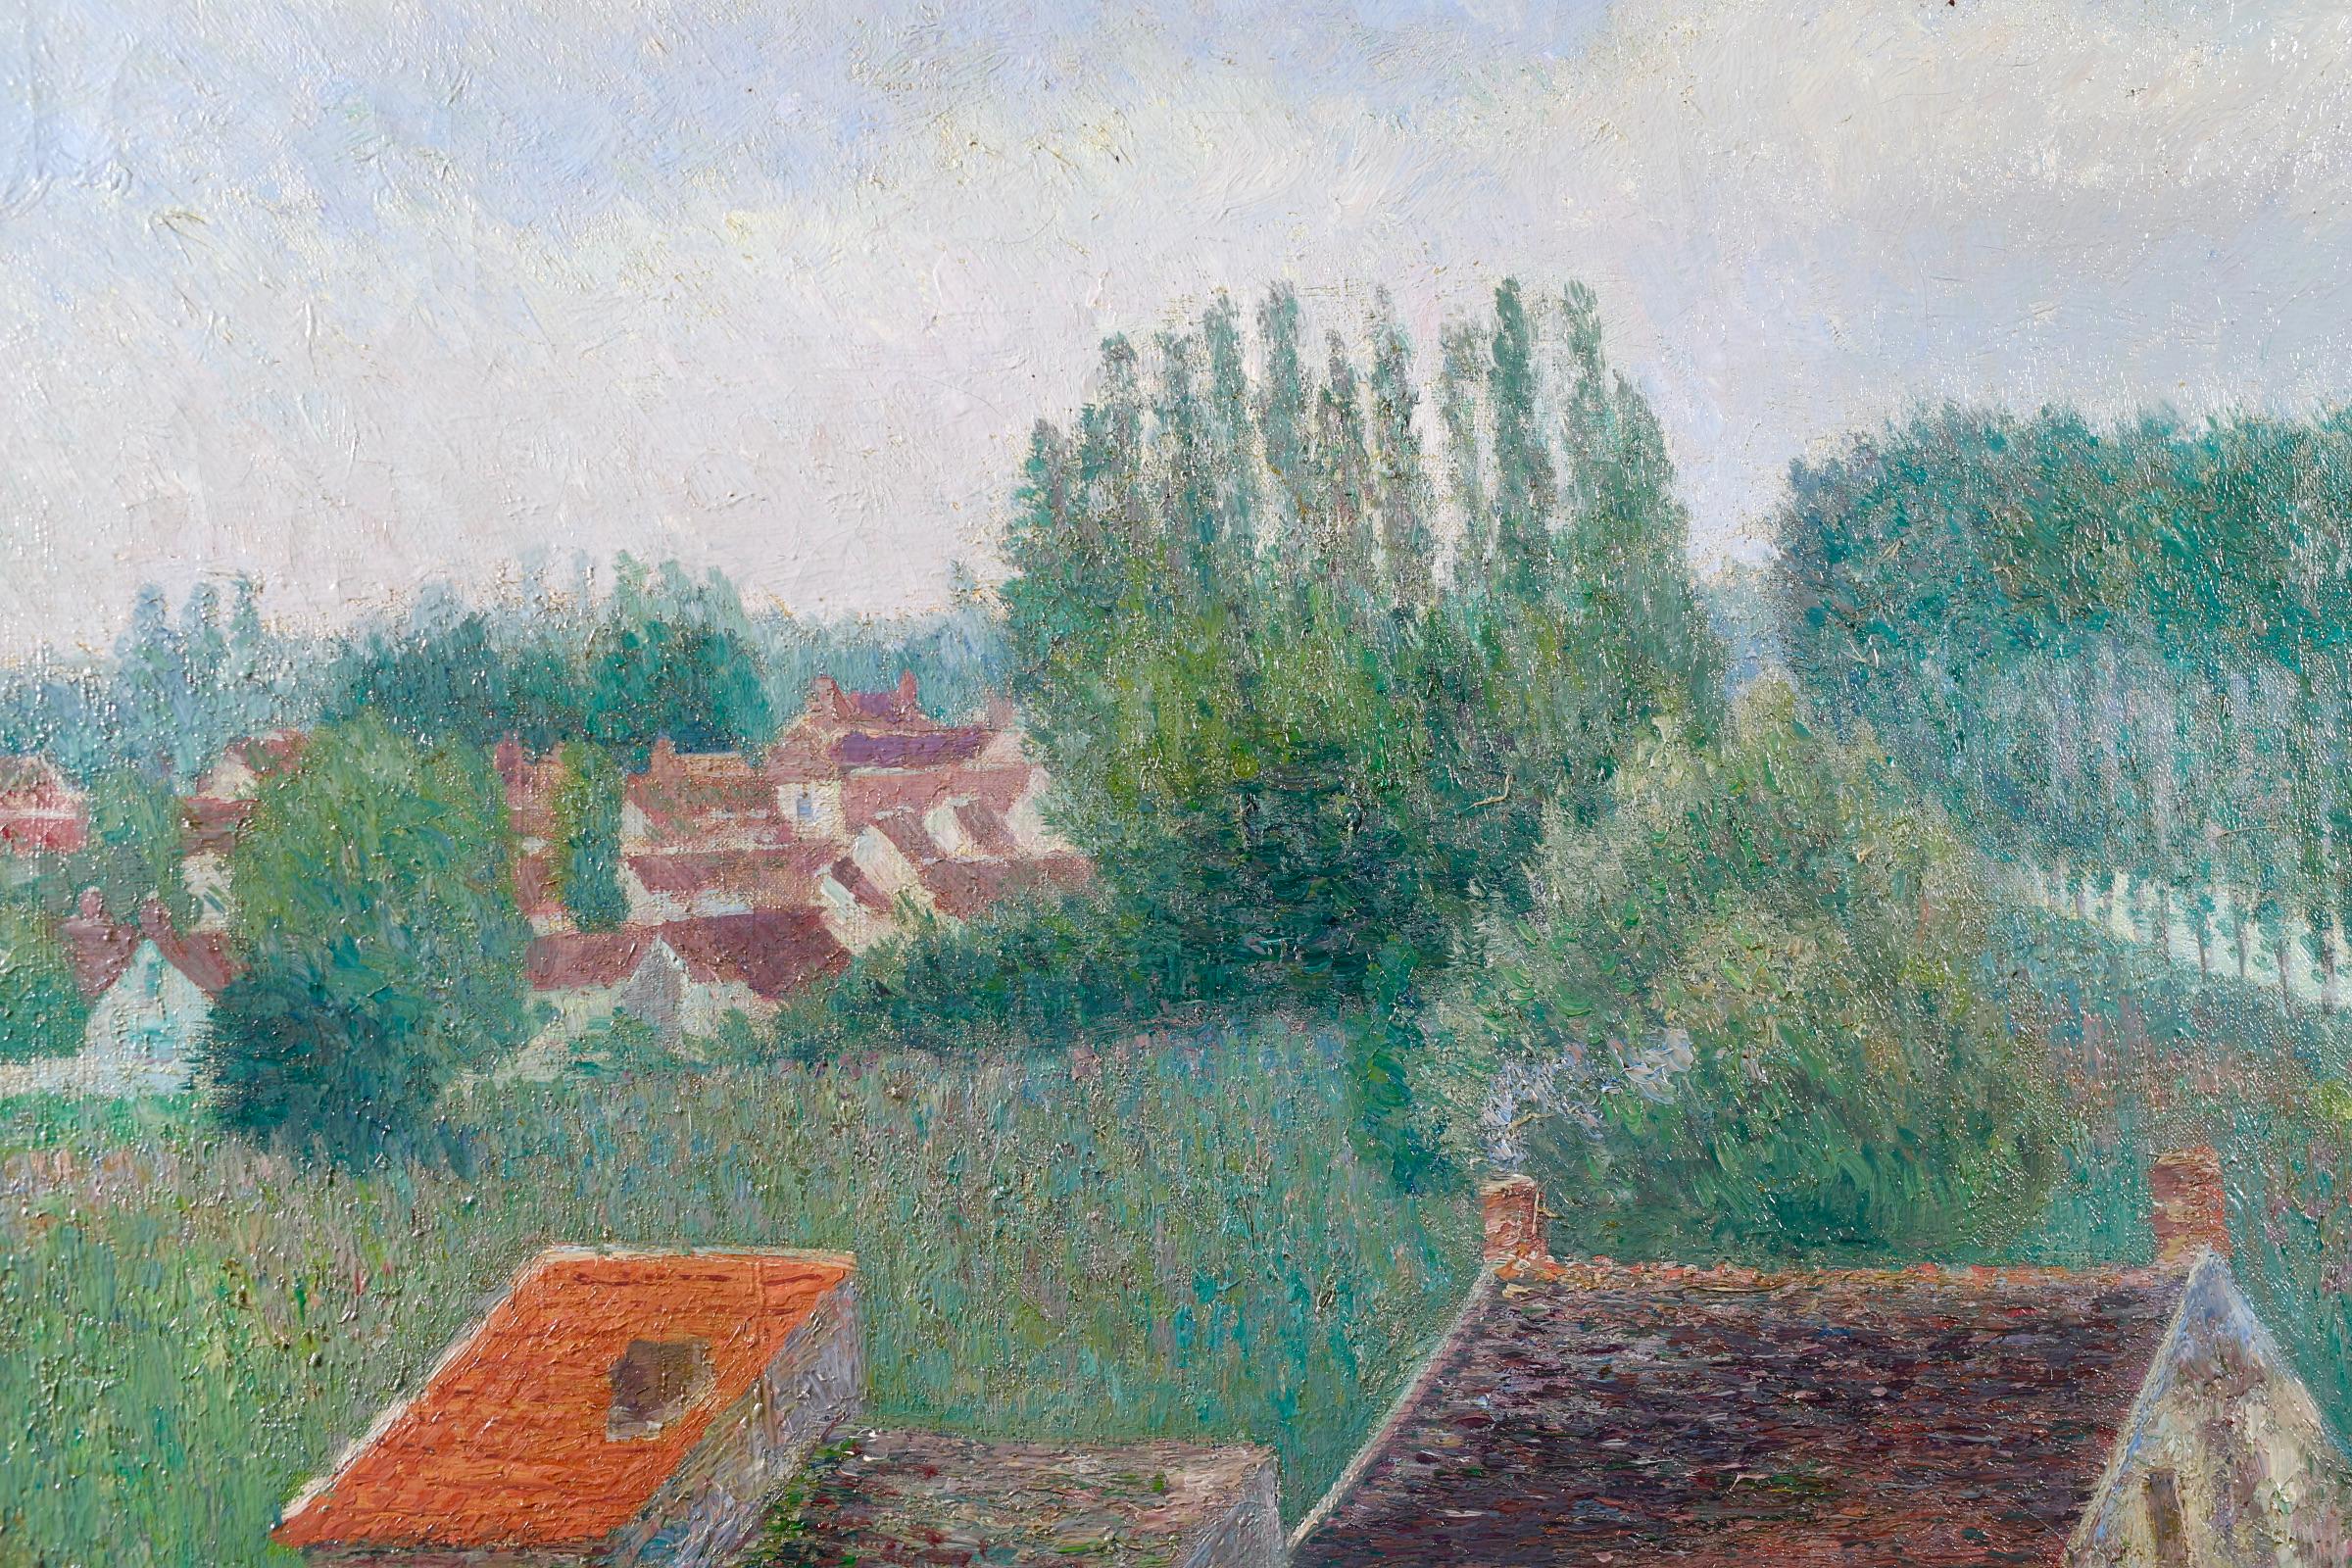 A beautiful large oil on canvas by the Flemish impressionist painter Bernardus Klene. The work depicts a wonderful green landscape of the town of Moret-sur-Loing in France with a farmhouse in the foreground the canal to the right and the rooftops of